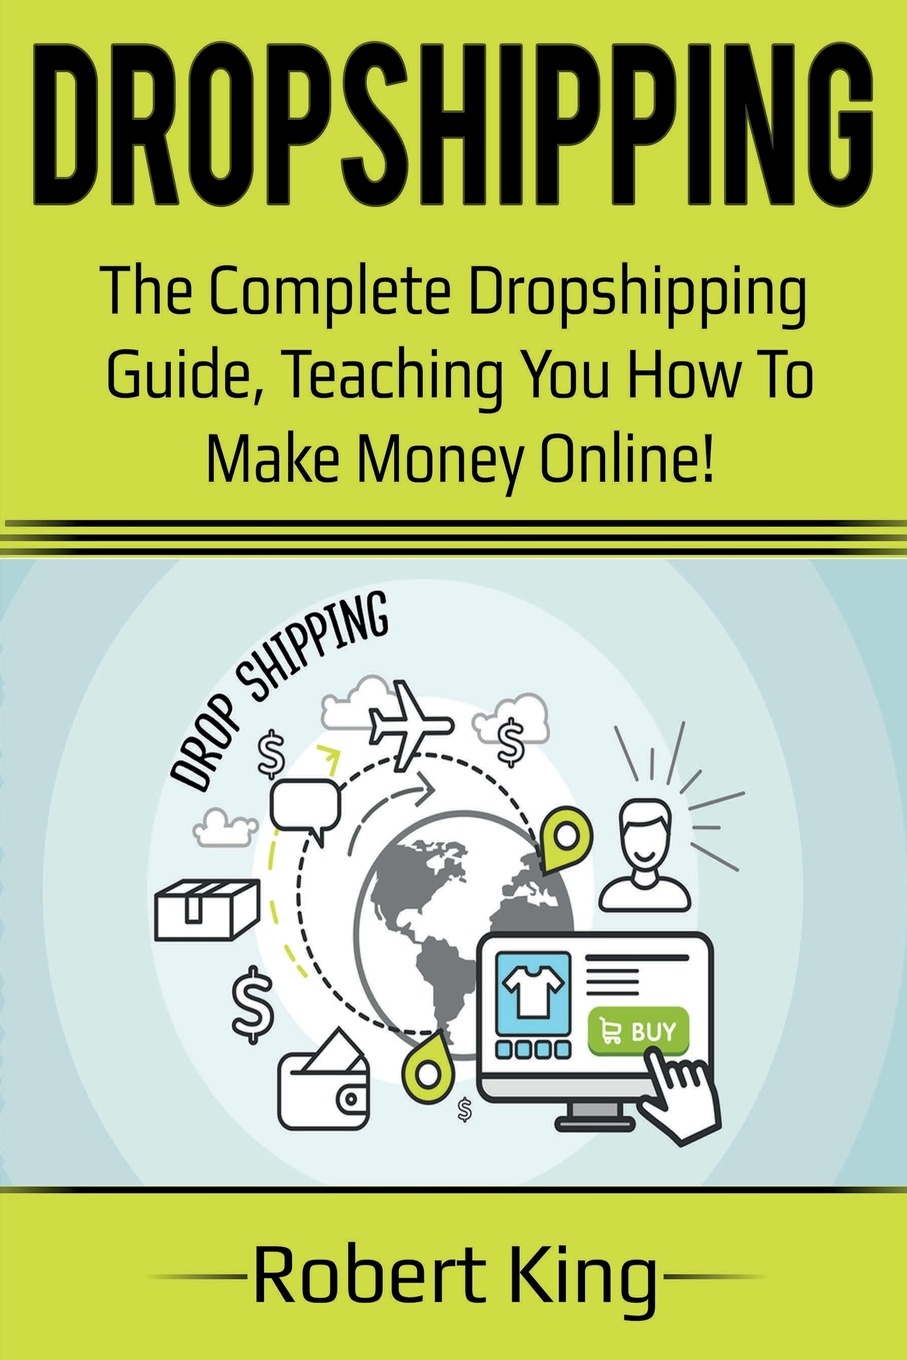 Dropshipping. The complete dropshipping guide, teaching you how to make money online!